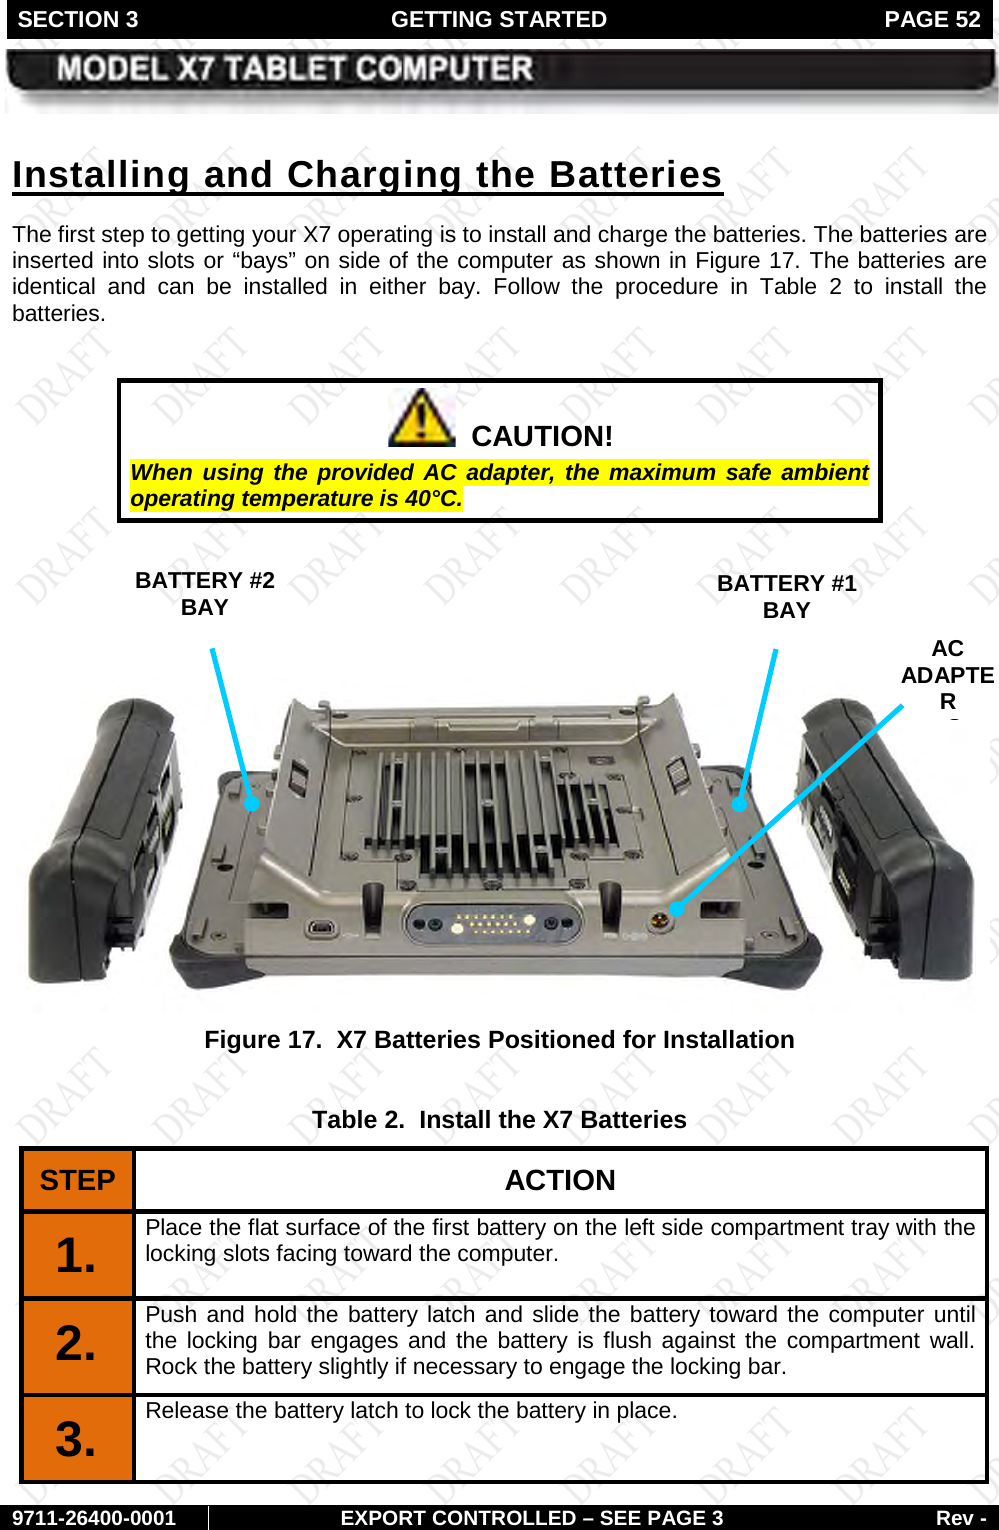 SECTION 3 GETTING STARTED  PAGE 52        9711-26400-0001 EXPORT CONTROLLED – SEE PAGE 3 Rev - The first step to getting your X7 operating is to install and charge the batteries. The batteries are inserted into slots or “bays” on side of the computer as shown in Installing and Charging the Batteries Figure 17. The batteries are identical and can be installed in either bay. Follow the procedure in Table  2  to install the batteries.    CAUTION! When using the provided AC adapter, the maximum safe ambient operating temperature is 40°C.      Figure 17.  X7 Batteries Positioned for Installation  Table 2.  Install the X7 Batteries STEP  ACTION 1.  Place the flat surface of the first battery on the left side compartment tray with the locking slots facing toward the computer. 2.  Push and hold the battery latch and slide the battery toward the computer until the locking bar engages and the battery is flush against the compartment wall. Rock the battery slightly if necessary to engage the locking bar. 3.  Release the battery latch to lock the battery in place. BATTERY #1  BAY BATTERY #2  BAY AC ADAPTER  C  